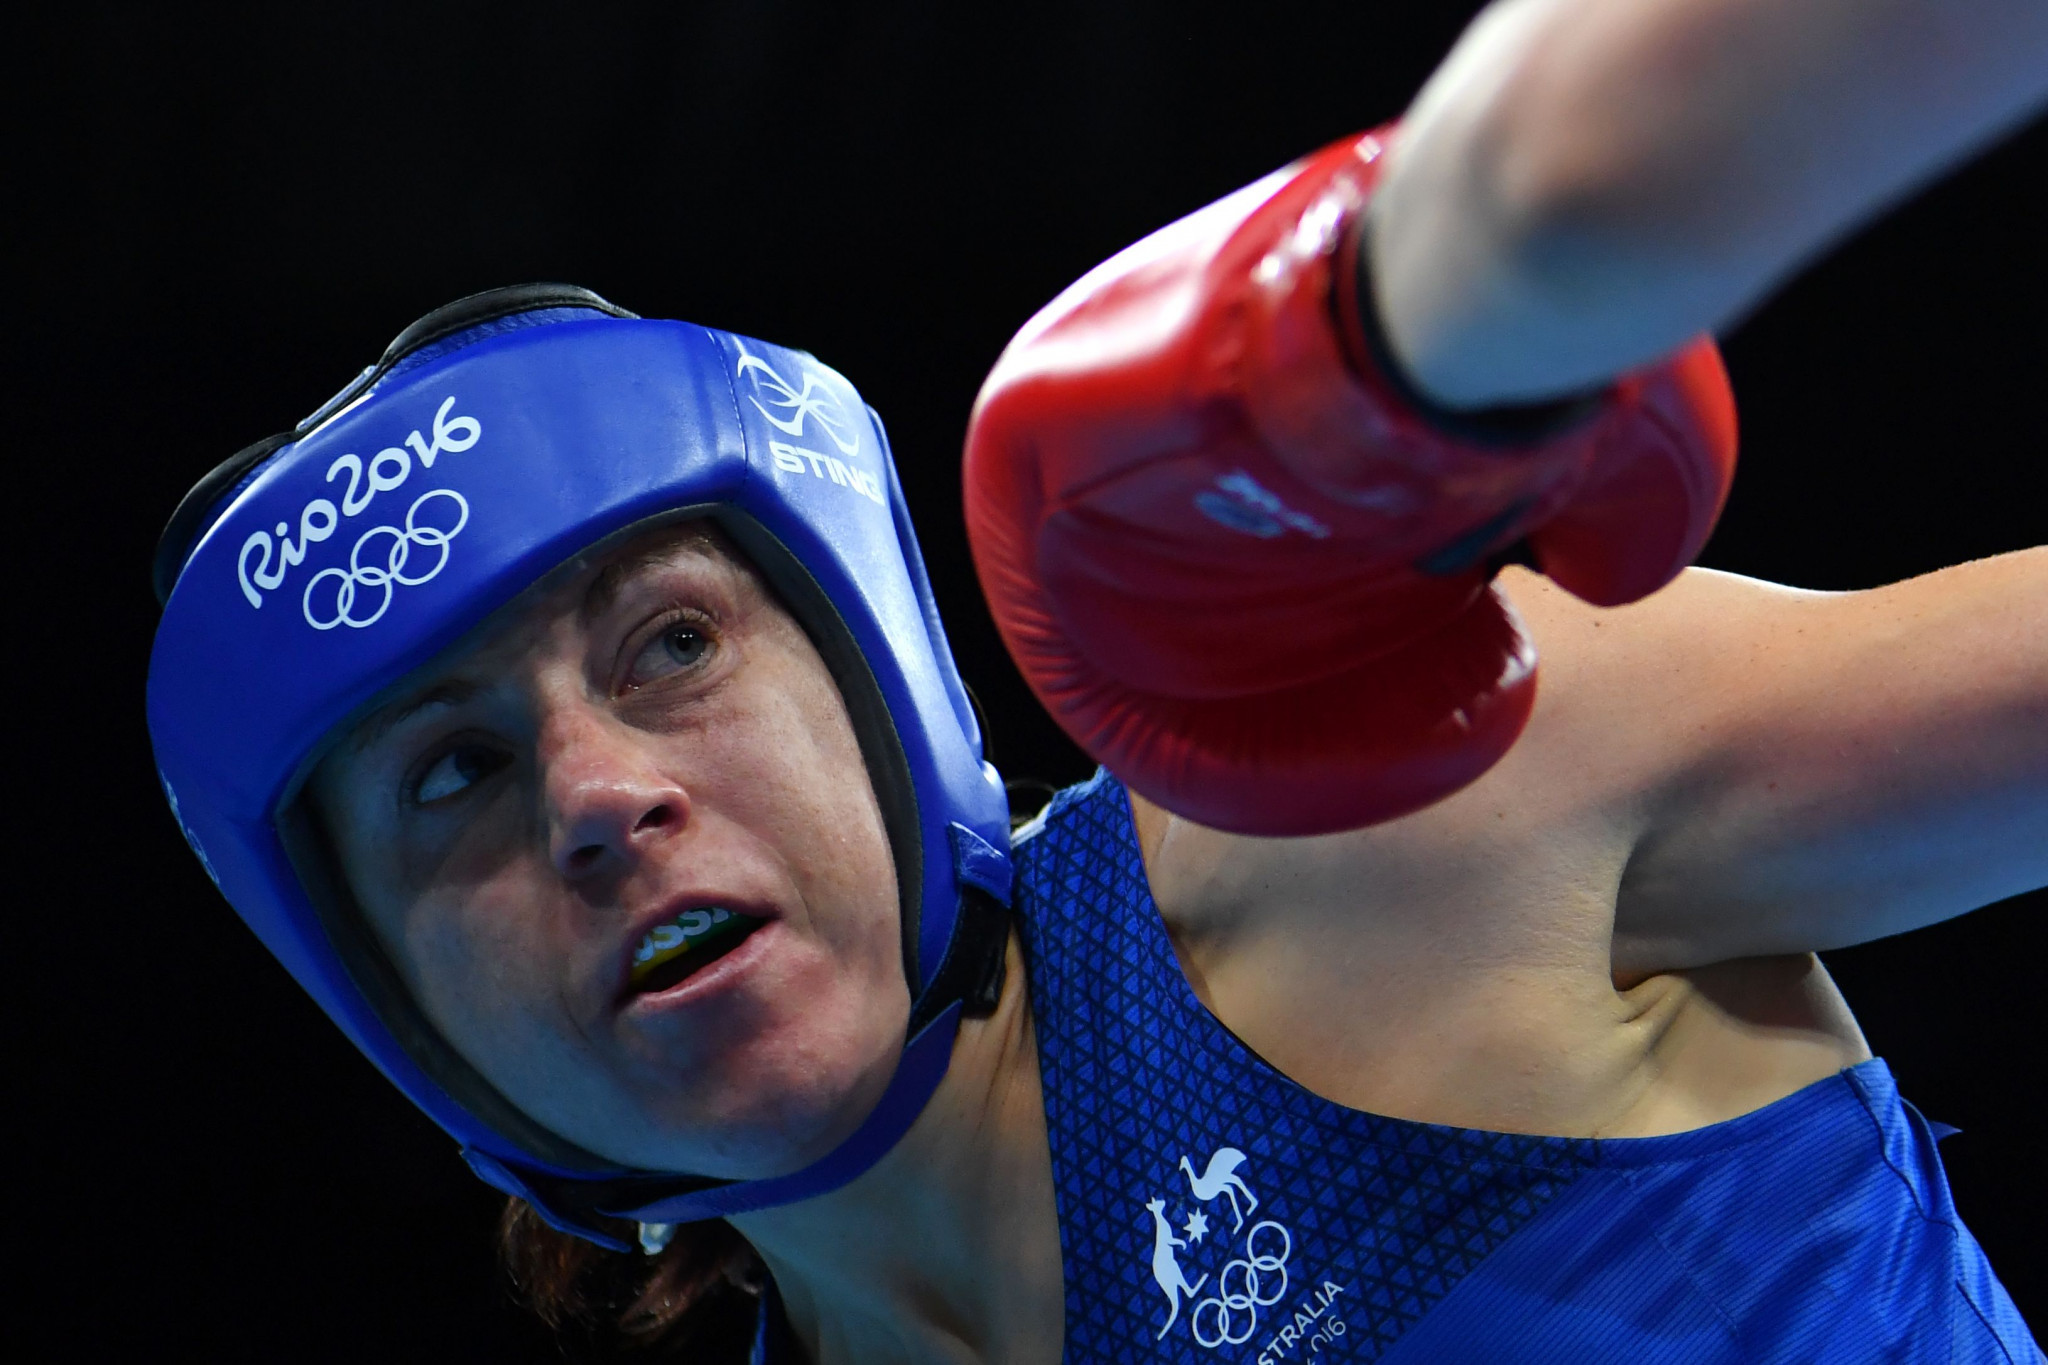 Shelley Watts of Australia was one of three boxers from Oceania to reach the Rio 2016 Olympic Games from a combined Oceania and Asia qualifying event ©Getty Images